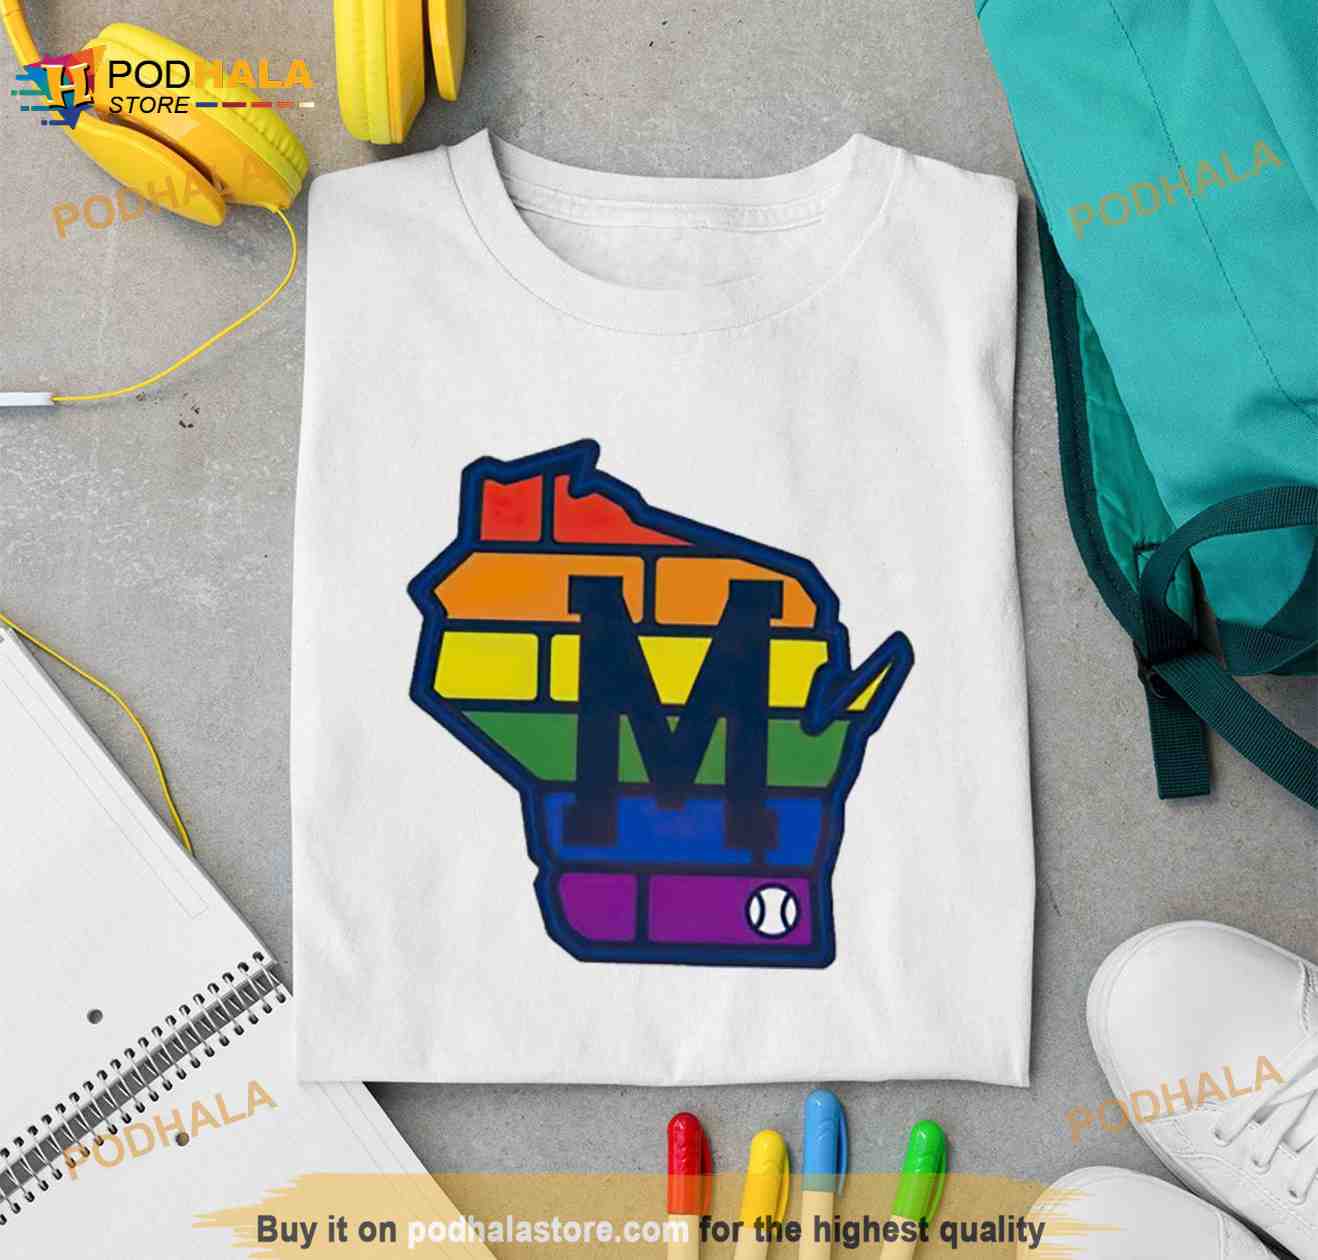 Milwaukee Brewers Pride LGBT Shirt - Bring Your Ideas, Thoughts